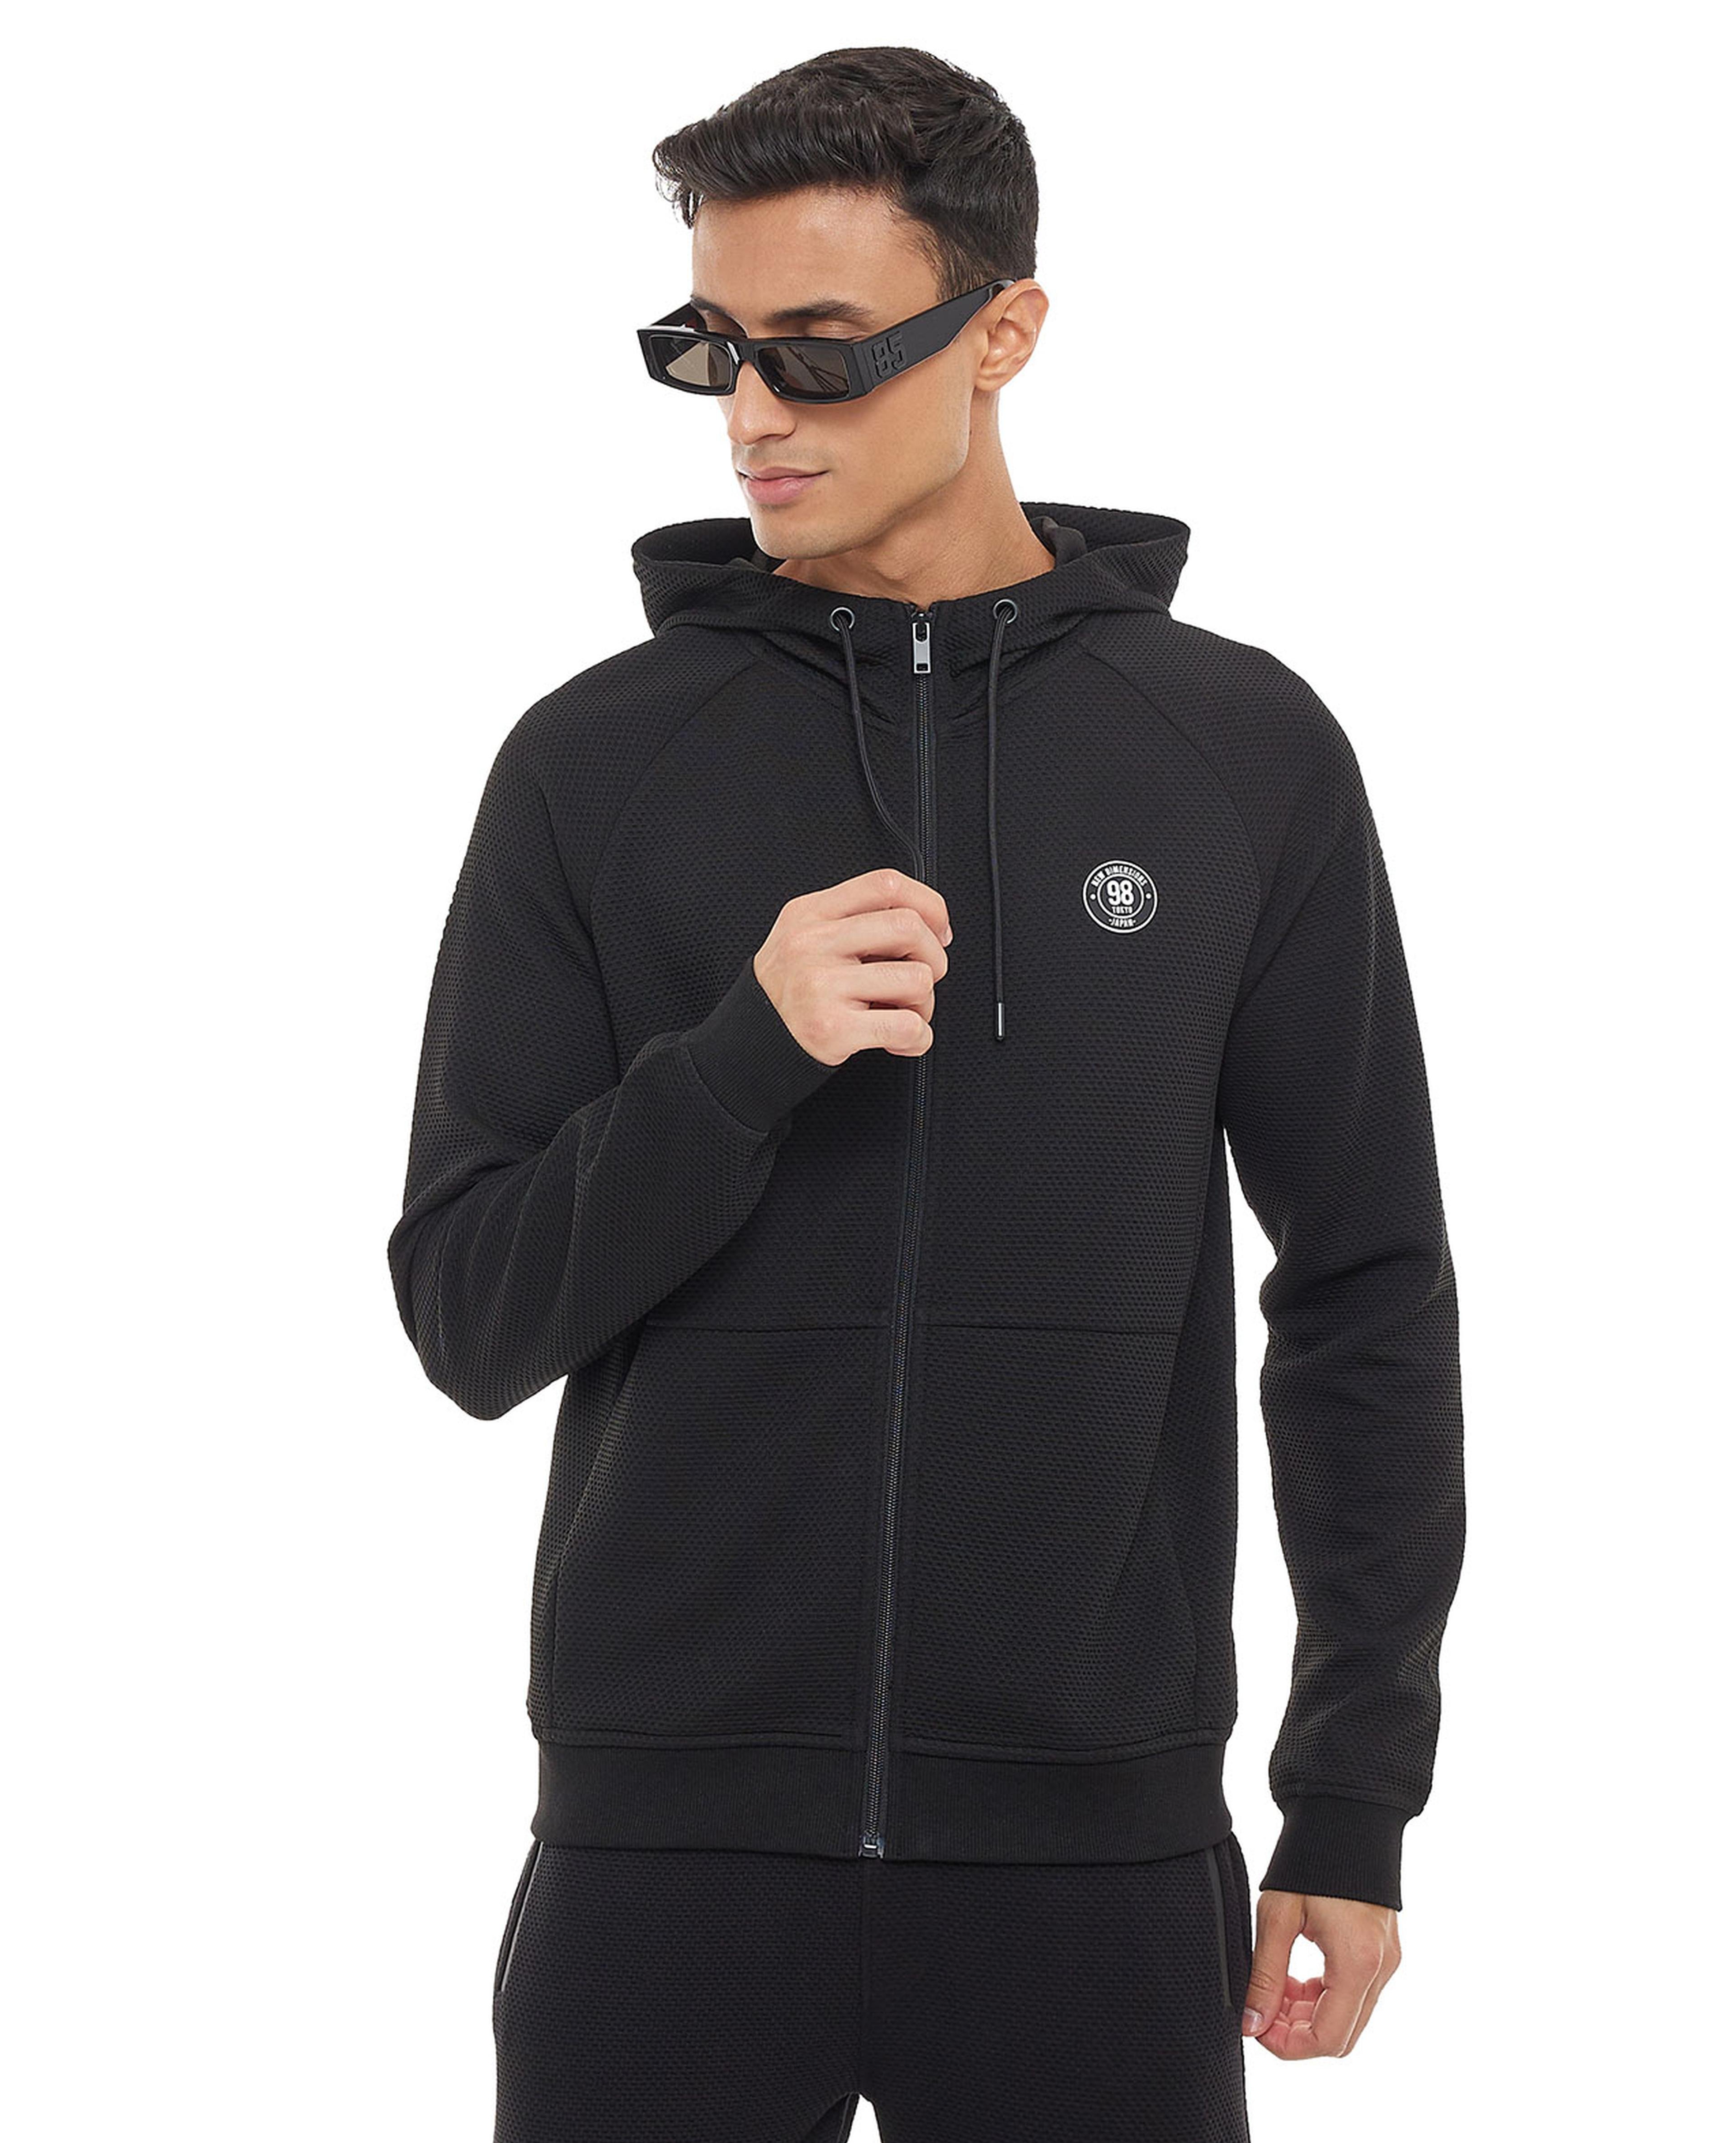 Perforated Hooded Active Jacket with Zipper Closure